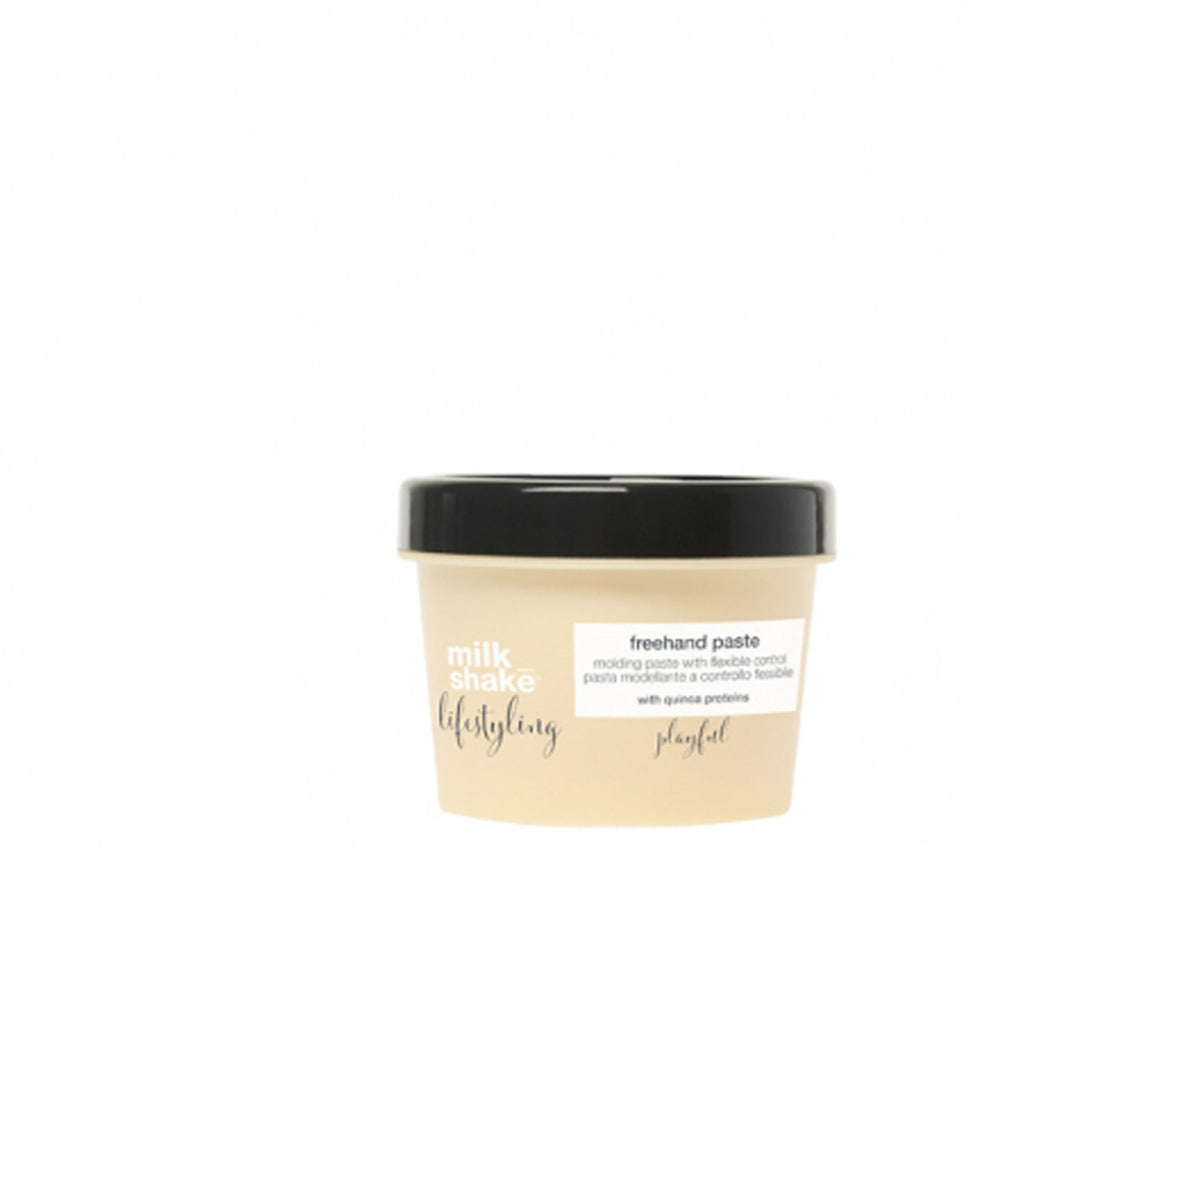 milk_shake Lifestyling Freehand Paste - Haircare Superstore